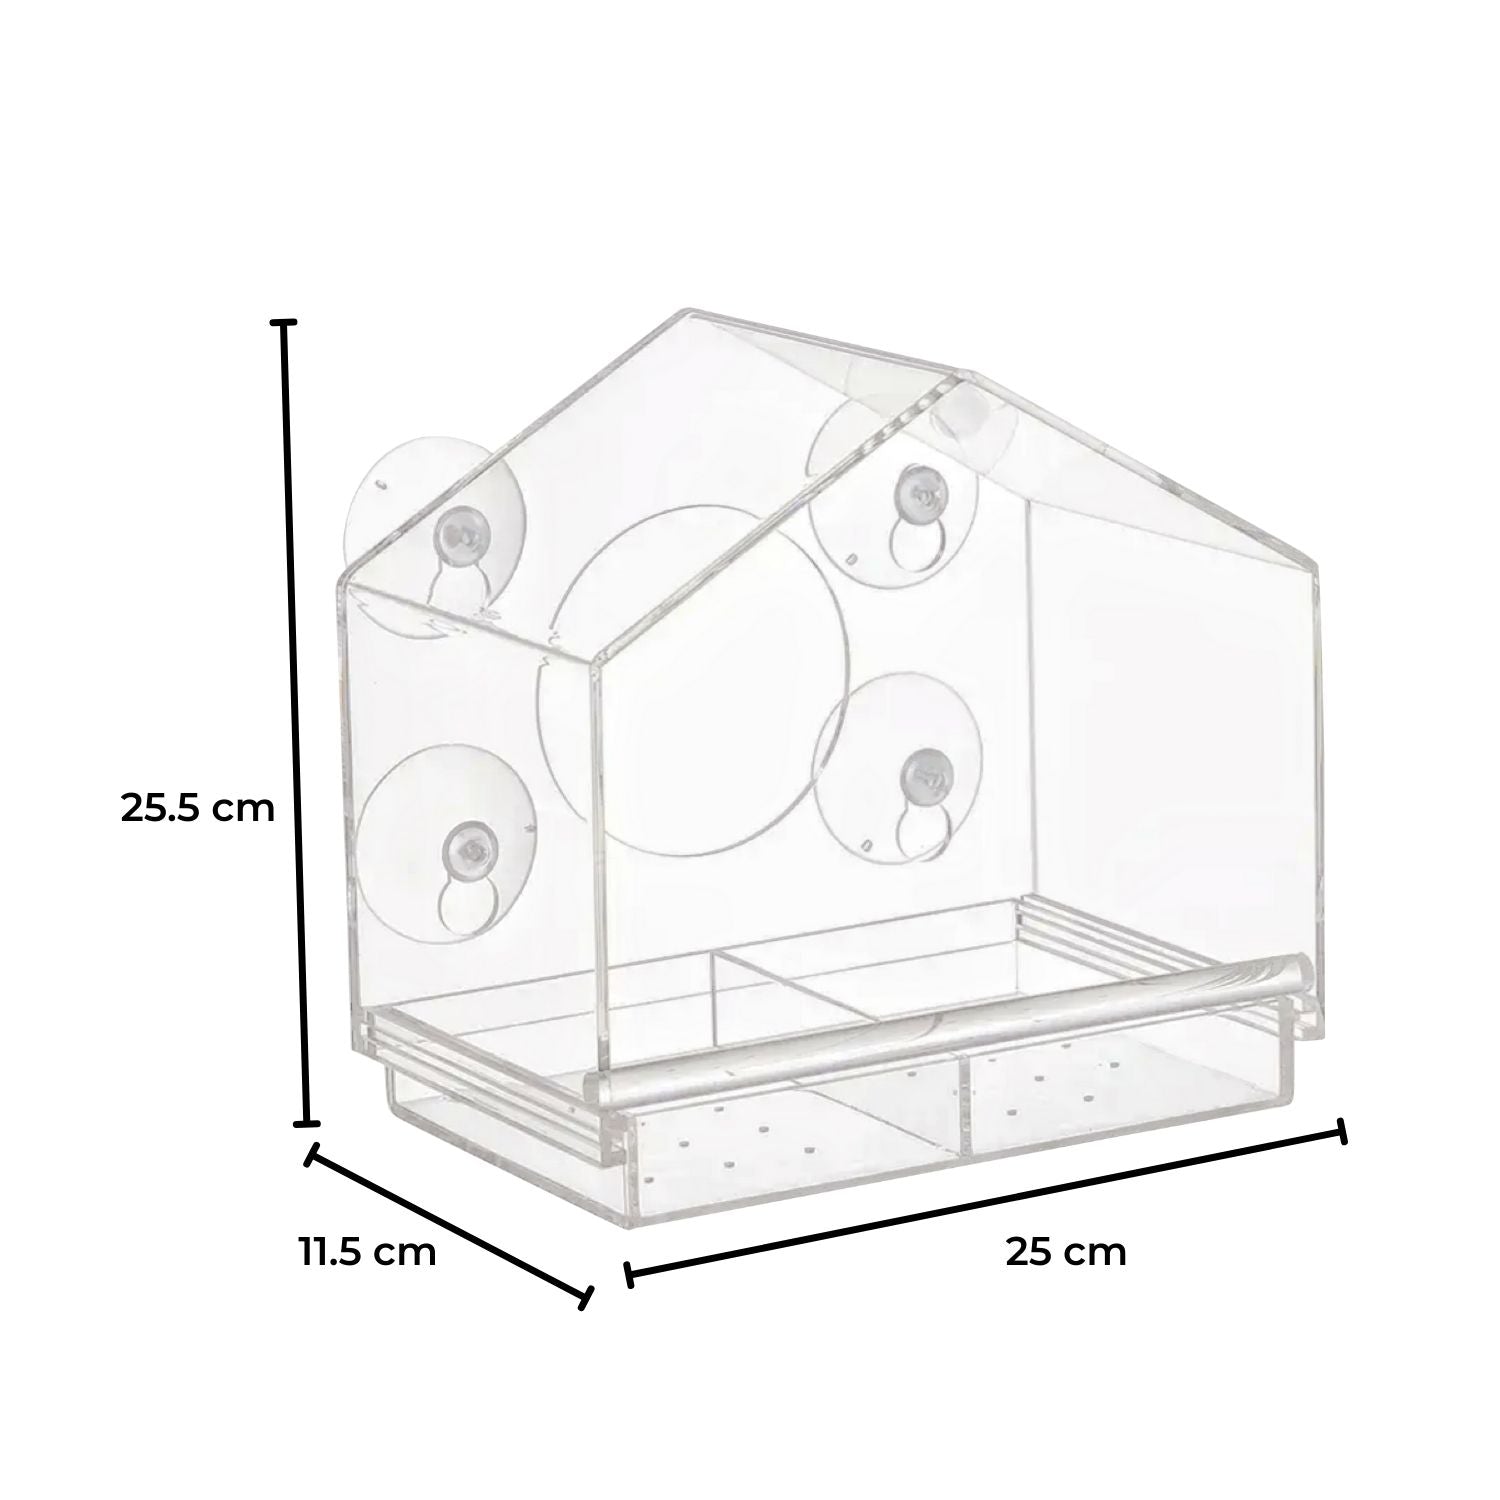 NOVEDEN Window Bird Feeder with Removable Tray Drain Holes and 4 Suction Cups (Transparent) NE-WBF-100-HSXY